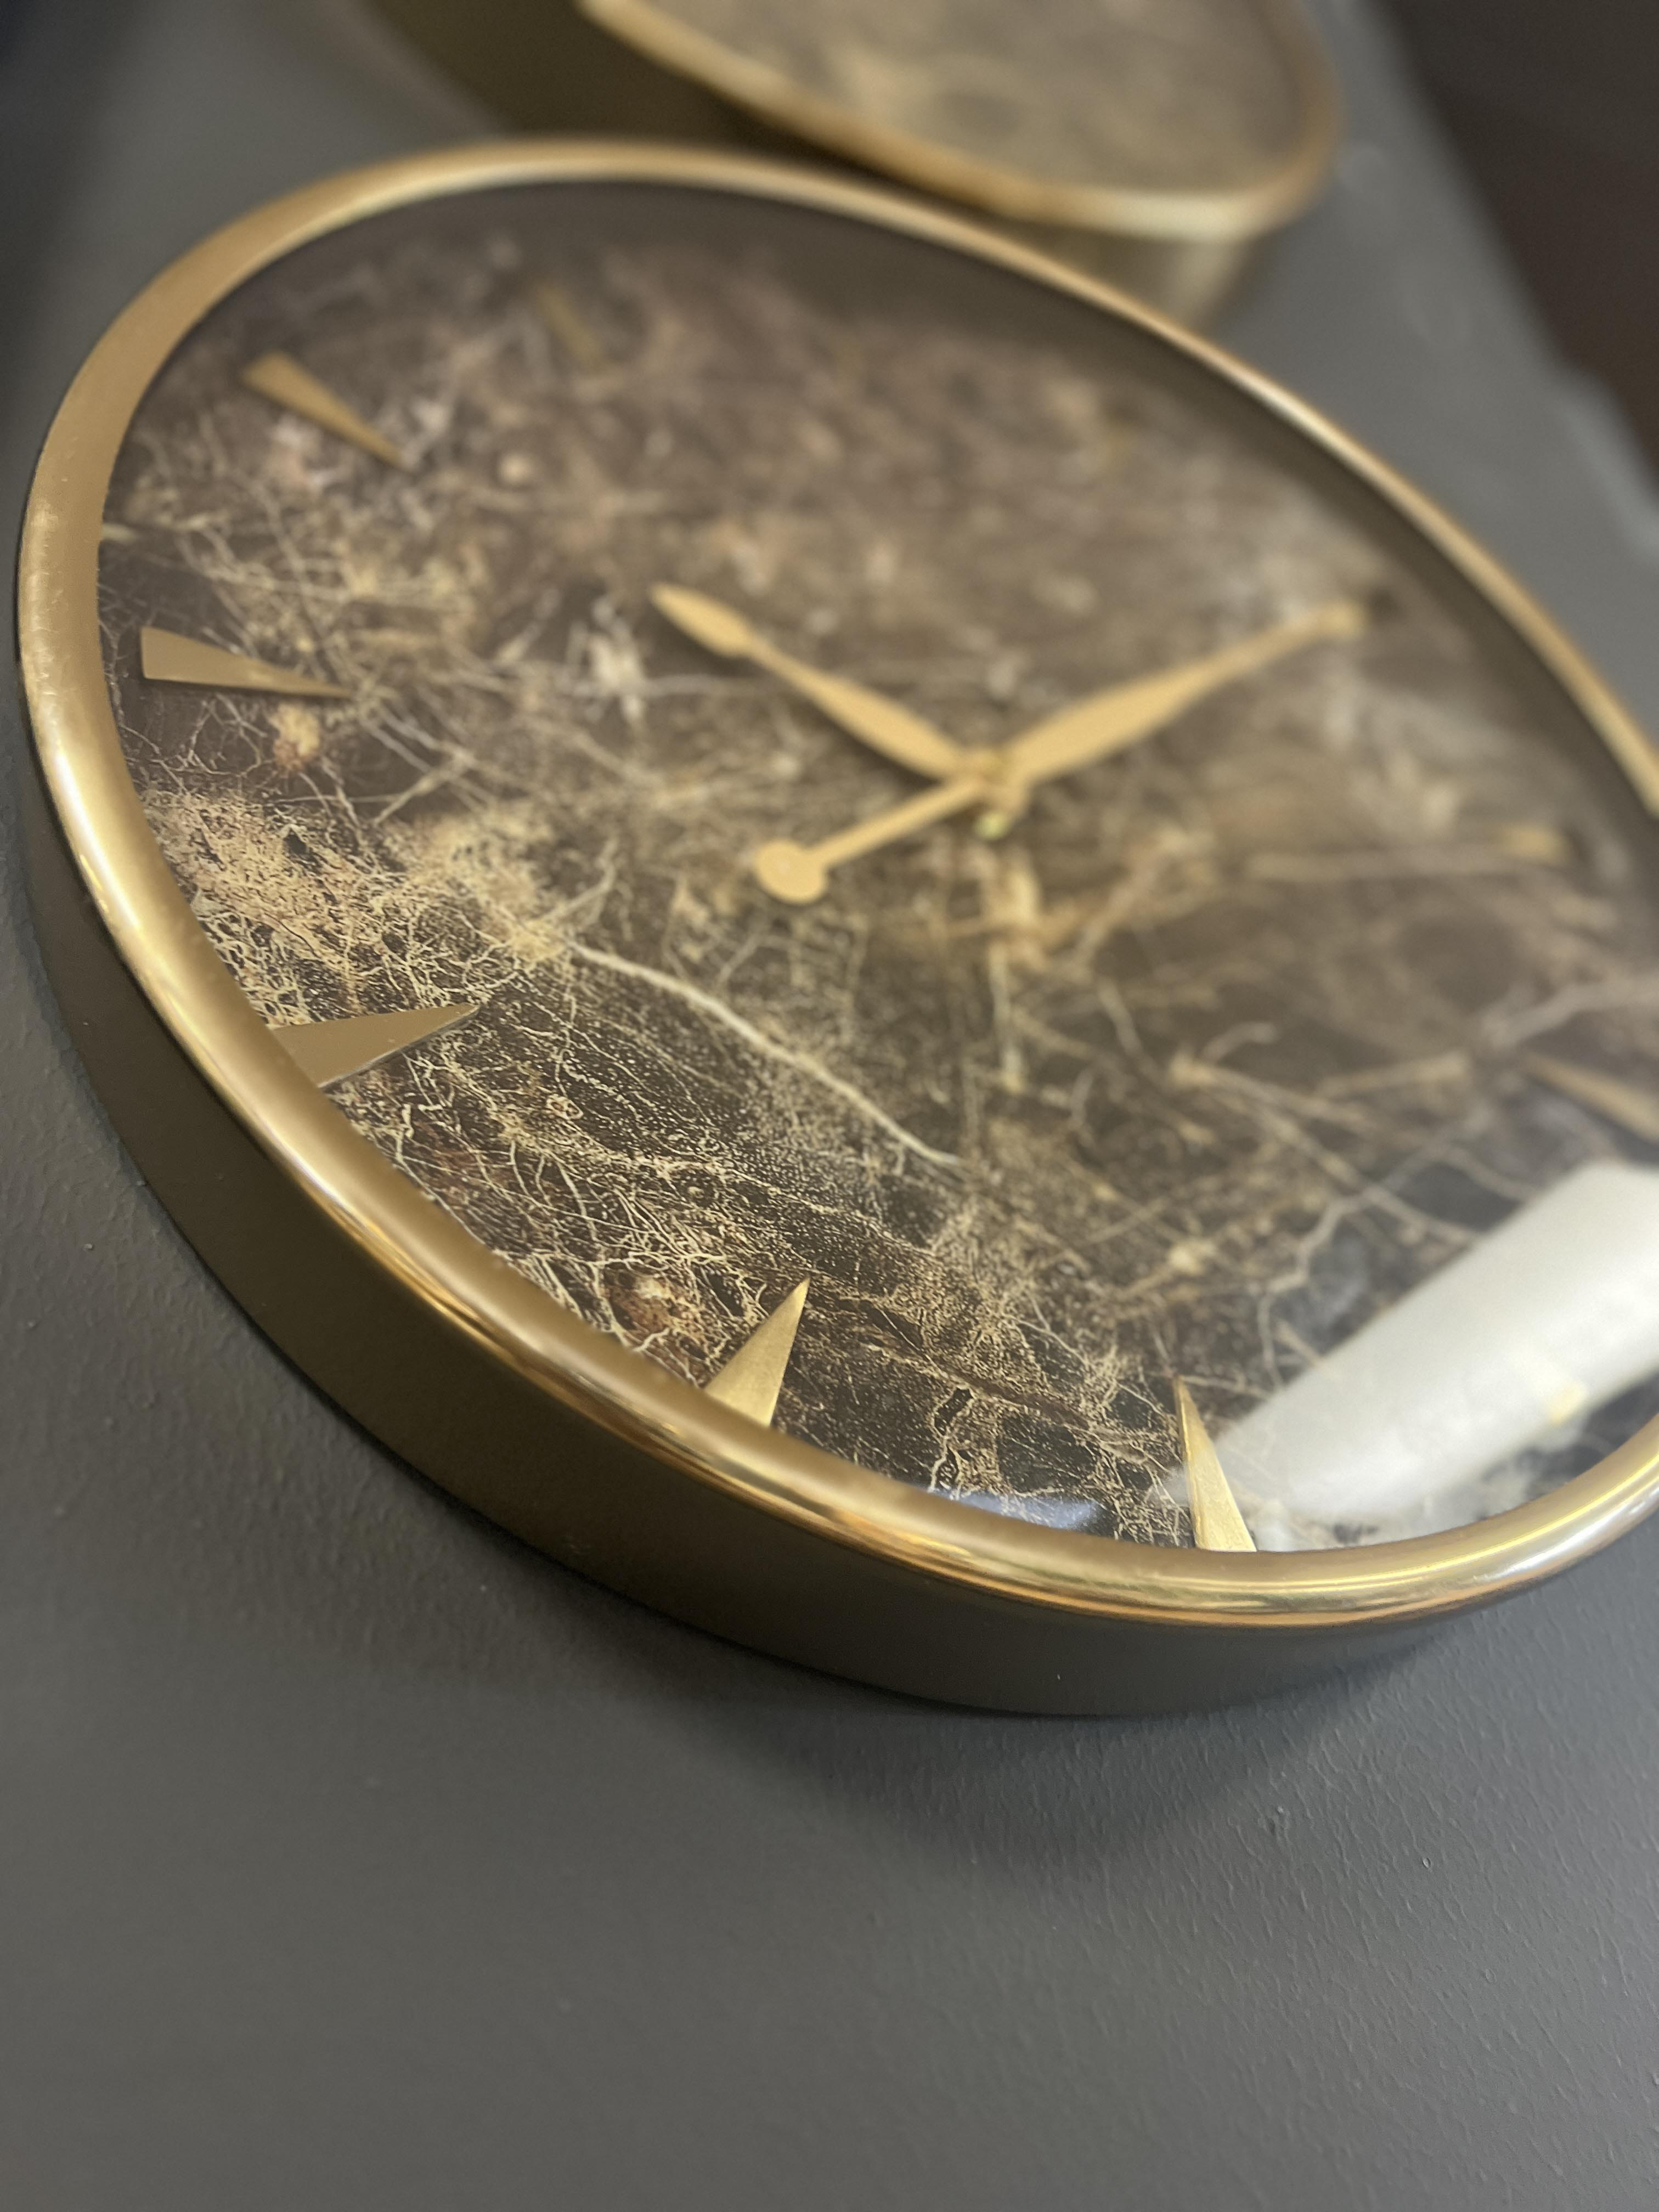 brushed metal wall clock with marble face 